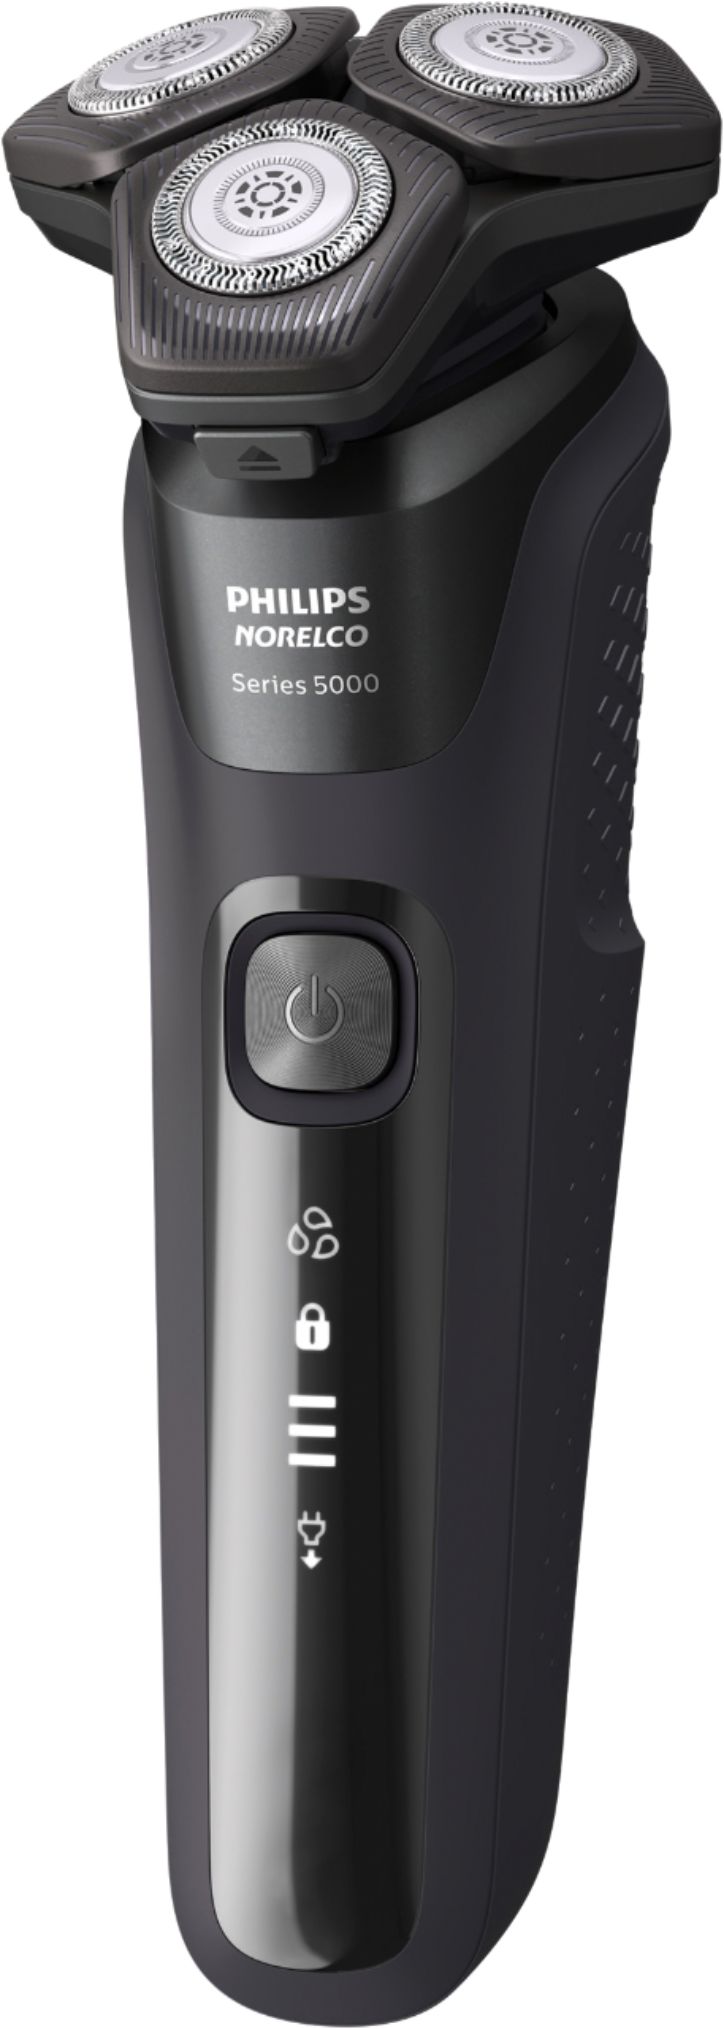 Customer Reviews: Philips Norelco Shaver 5300, Rechargeable Wet & Dry ...